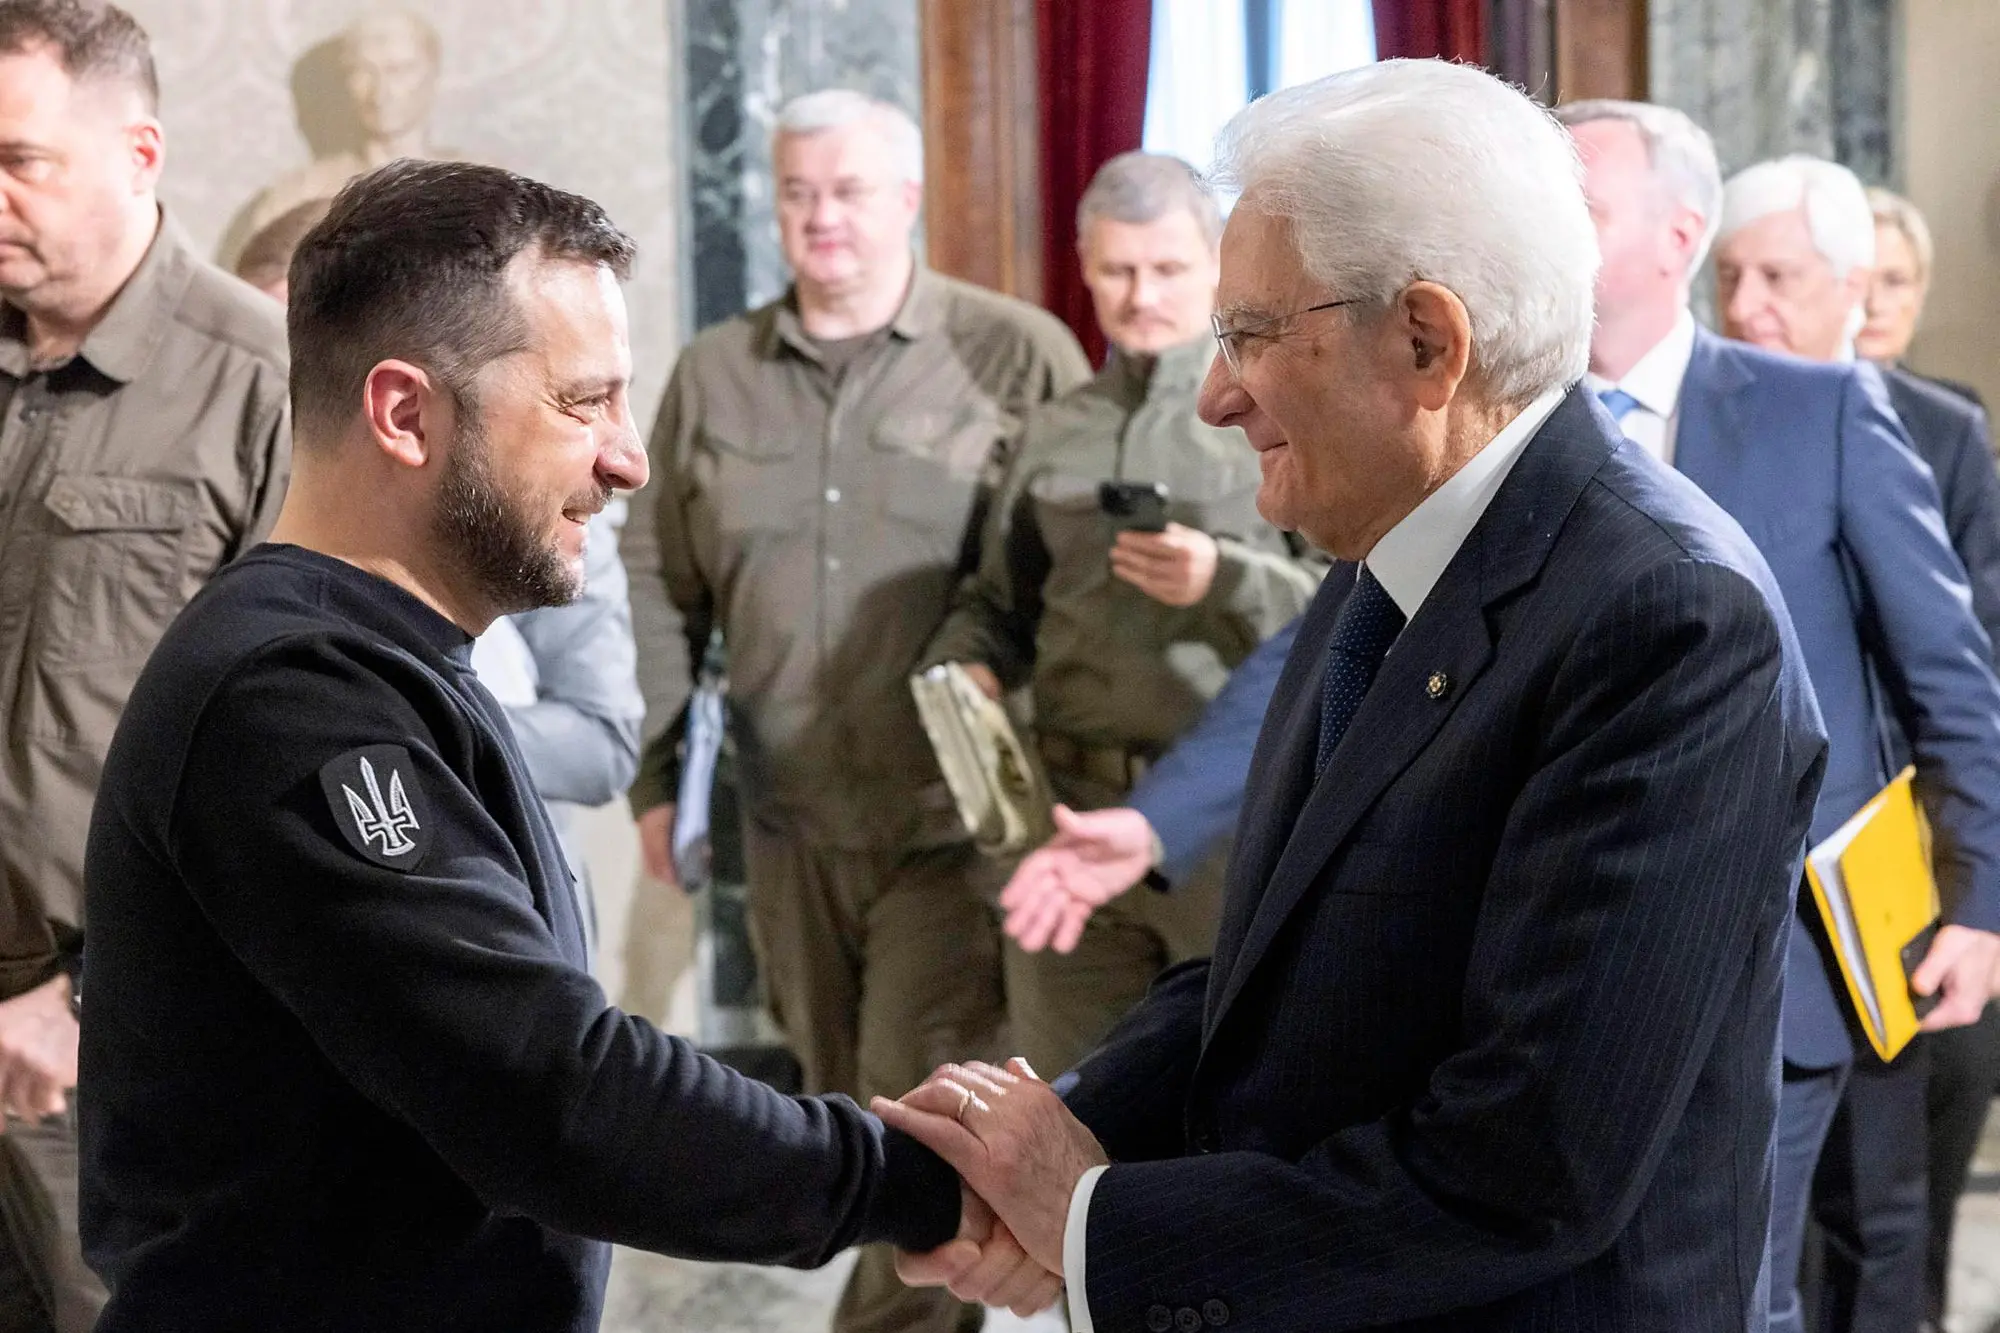 epa10624653 A handout picture made available by the Quirinal Presidential Palace (Palazzo del Quirinale) Press Office shows Ukrainian President Volodymyr Zelensky (L) shaking hands with Italian President Sergio Mattarella (R) upon arrival at Quirinale Palace for a meeting, Rome, Italy, 13 May 2023. It is the first time for Zelensky to come to Italy since the start of the Russian invasion of Ukraine in February 2022. EPA/QUIRINAL PALACE PRESS OFFICE HANDOUT HANDOUT EDITORIAL USE ONLY/NO SALES